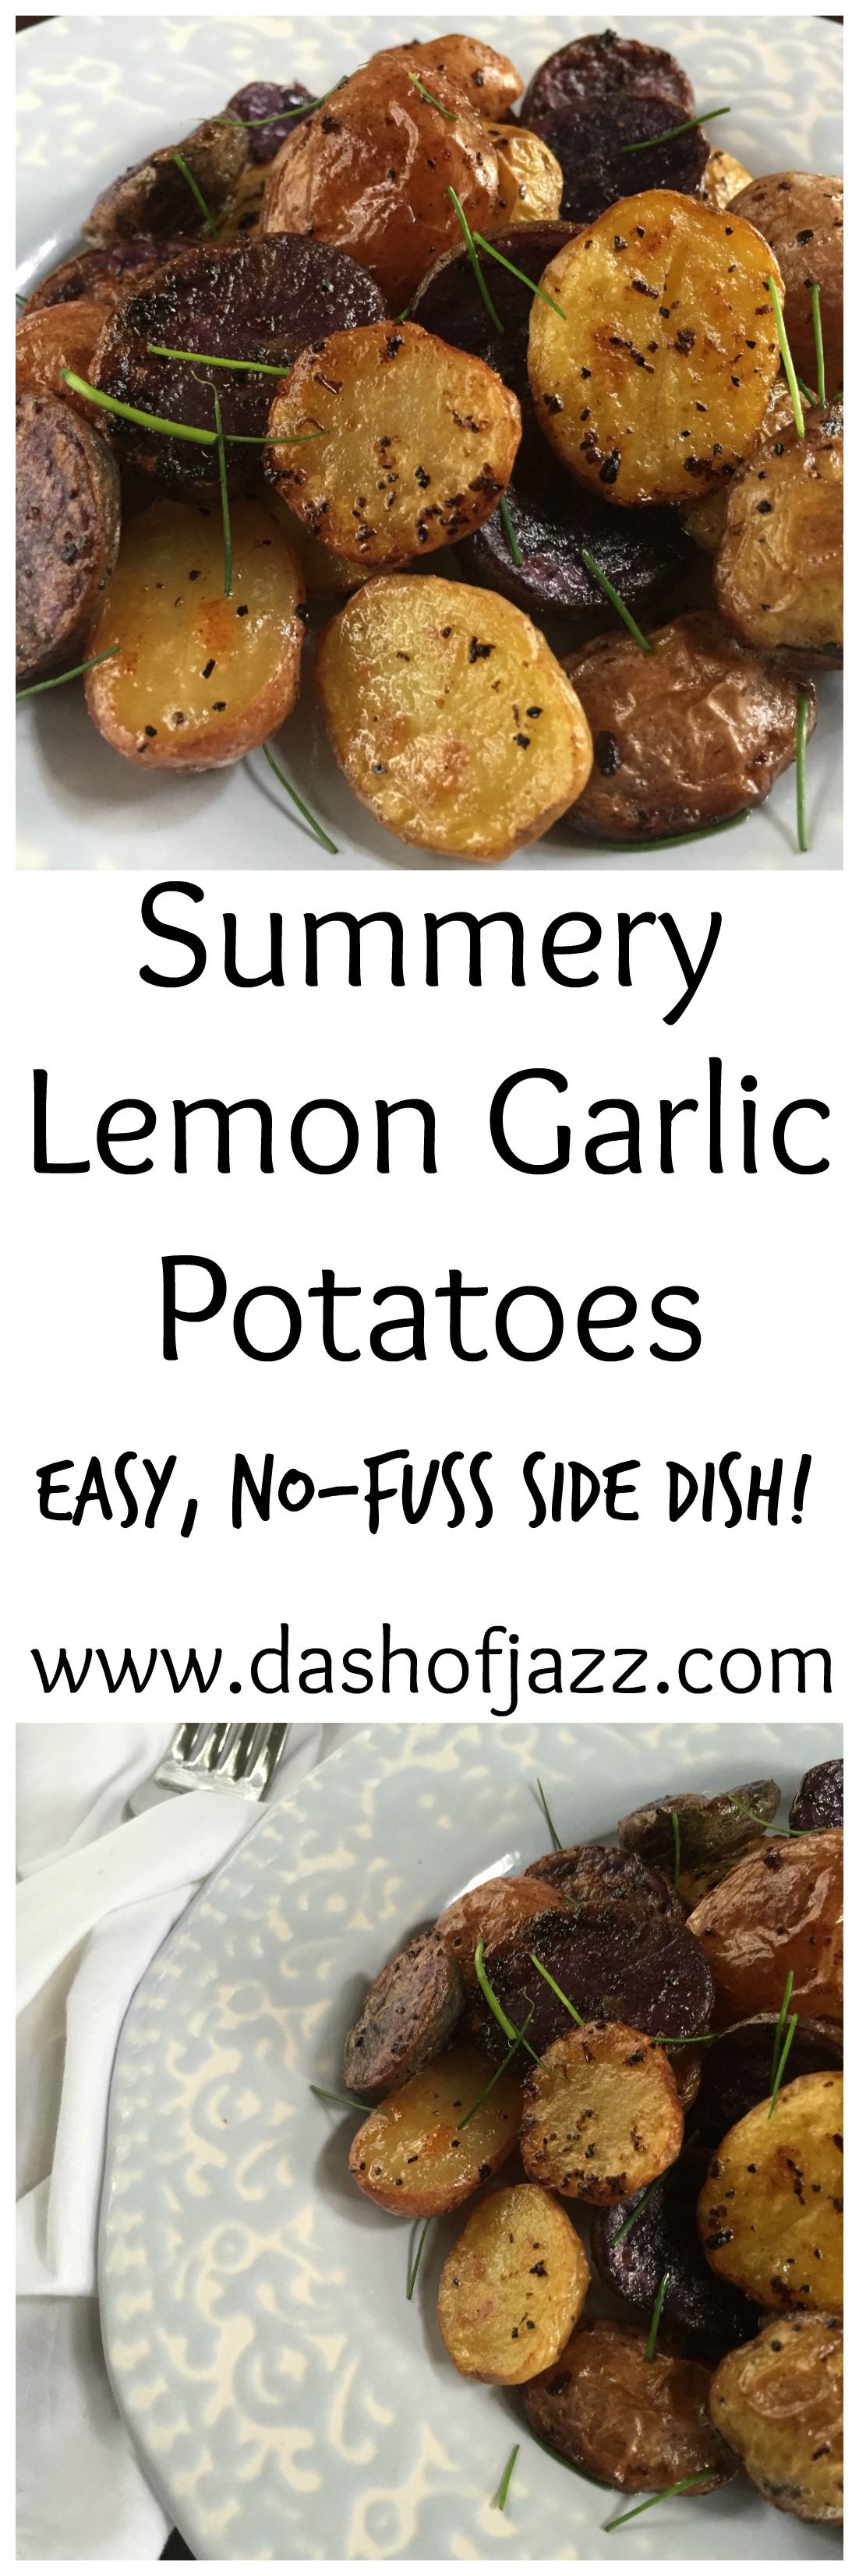 Summery Lemon Garlic Potatoes are a bright and delicious, no-fuss side dish perfect for summer! by Dash of Jazz